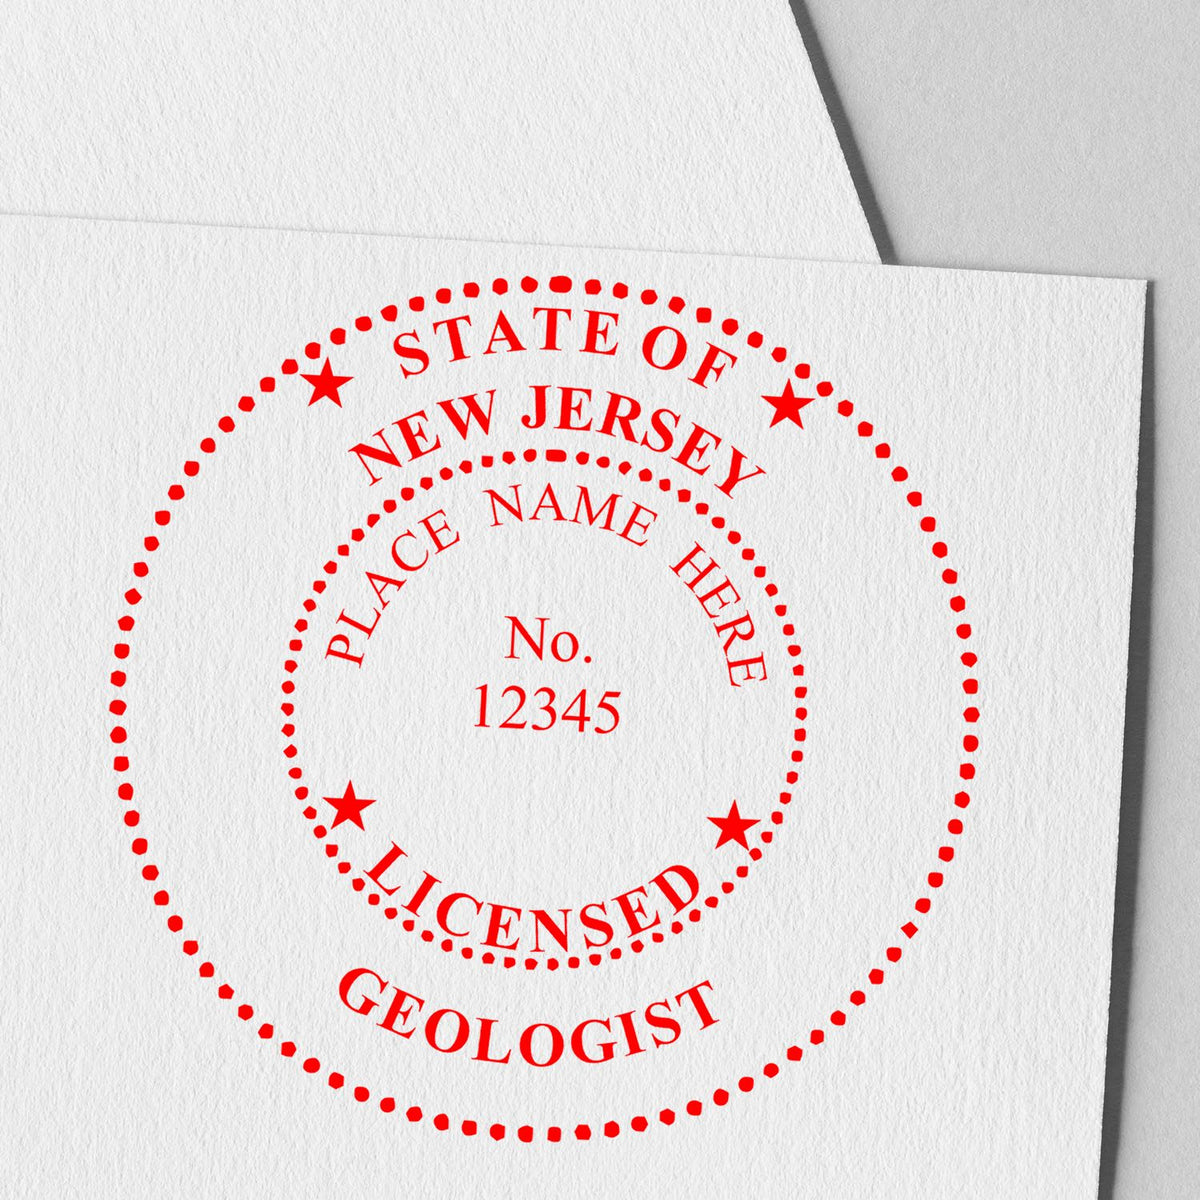 Another Example of a stamped impression of the Self-Inking New Jersey Geologist Stamp on a office form